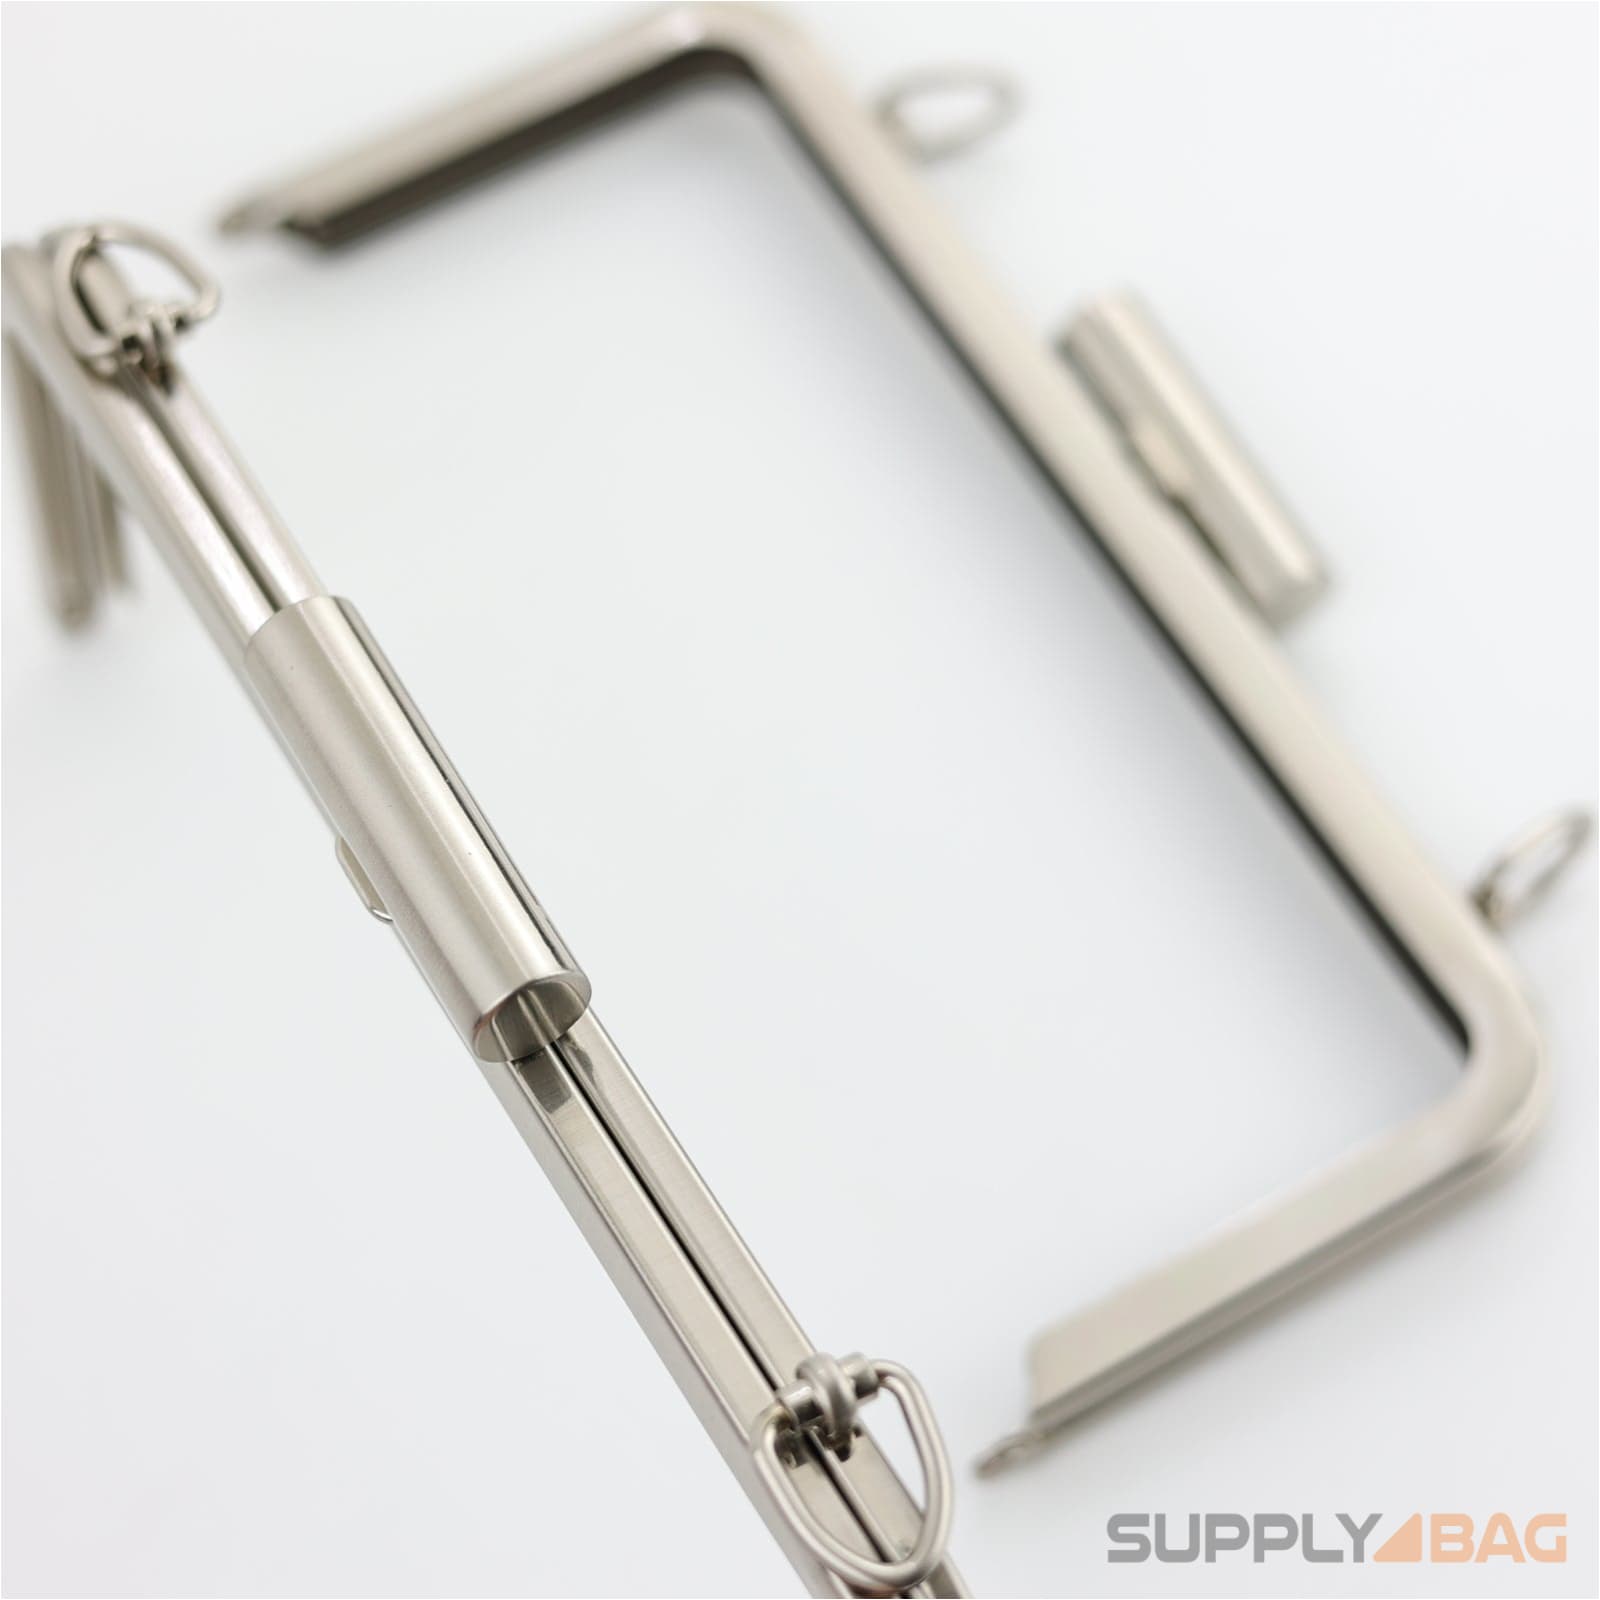 8.5 x 3.5 inch - Brushed Silver Metal Purse Frame with D Rings